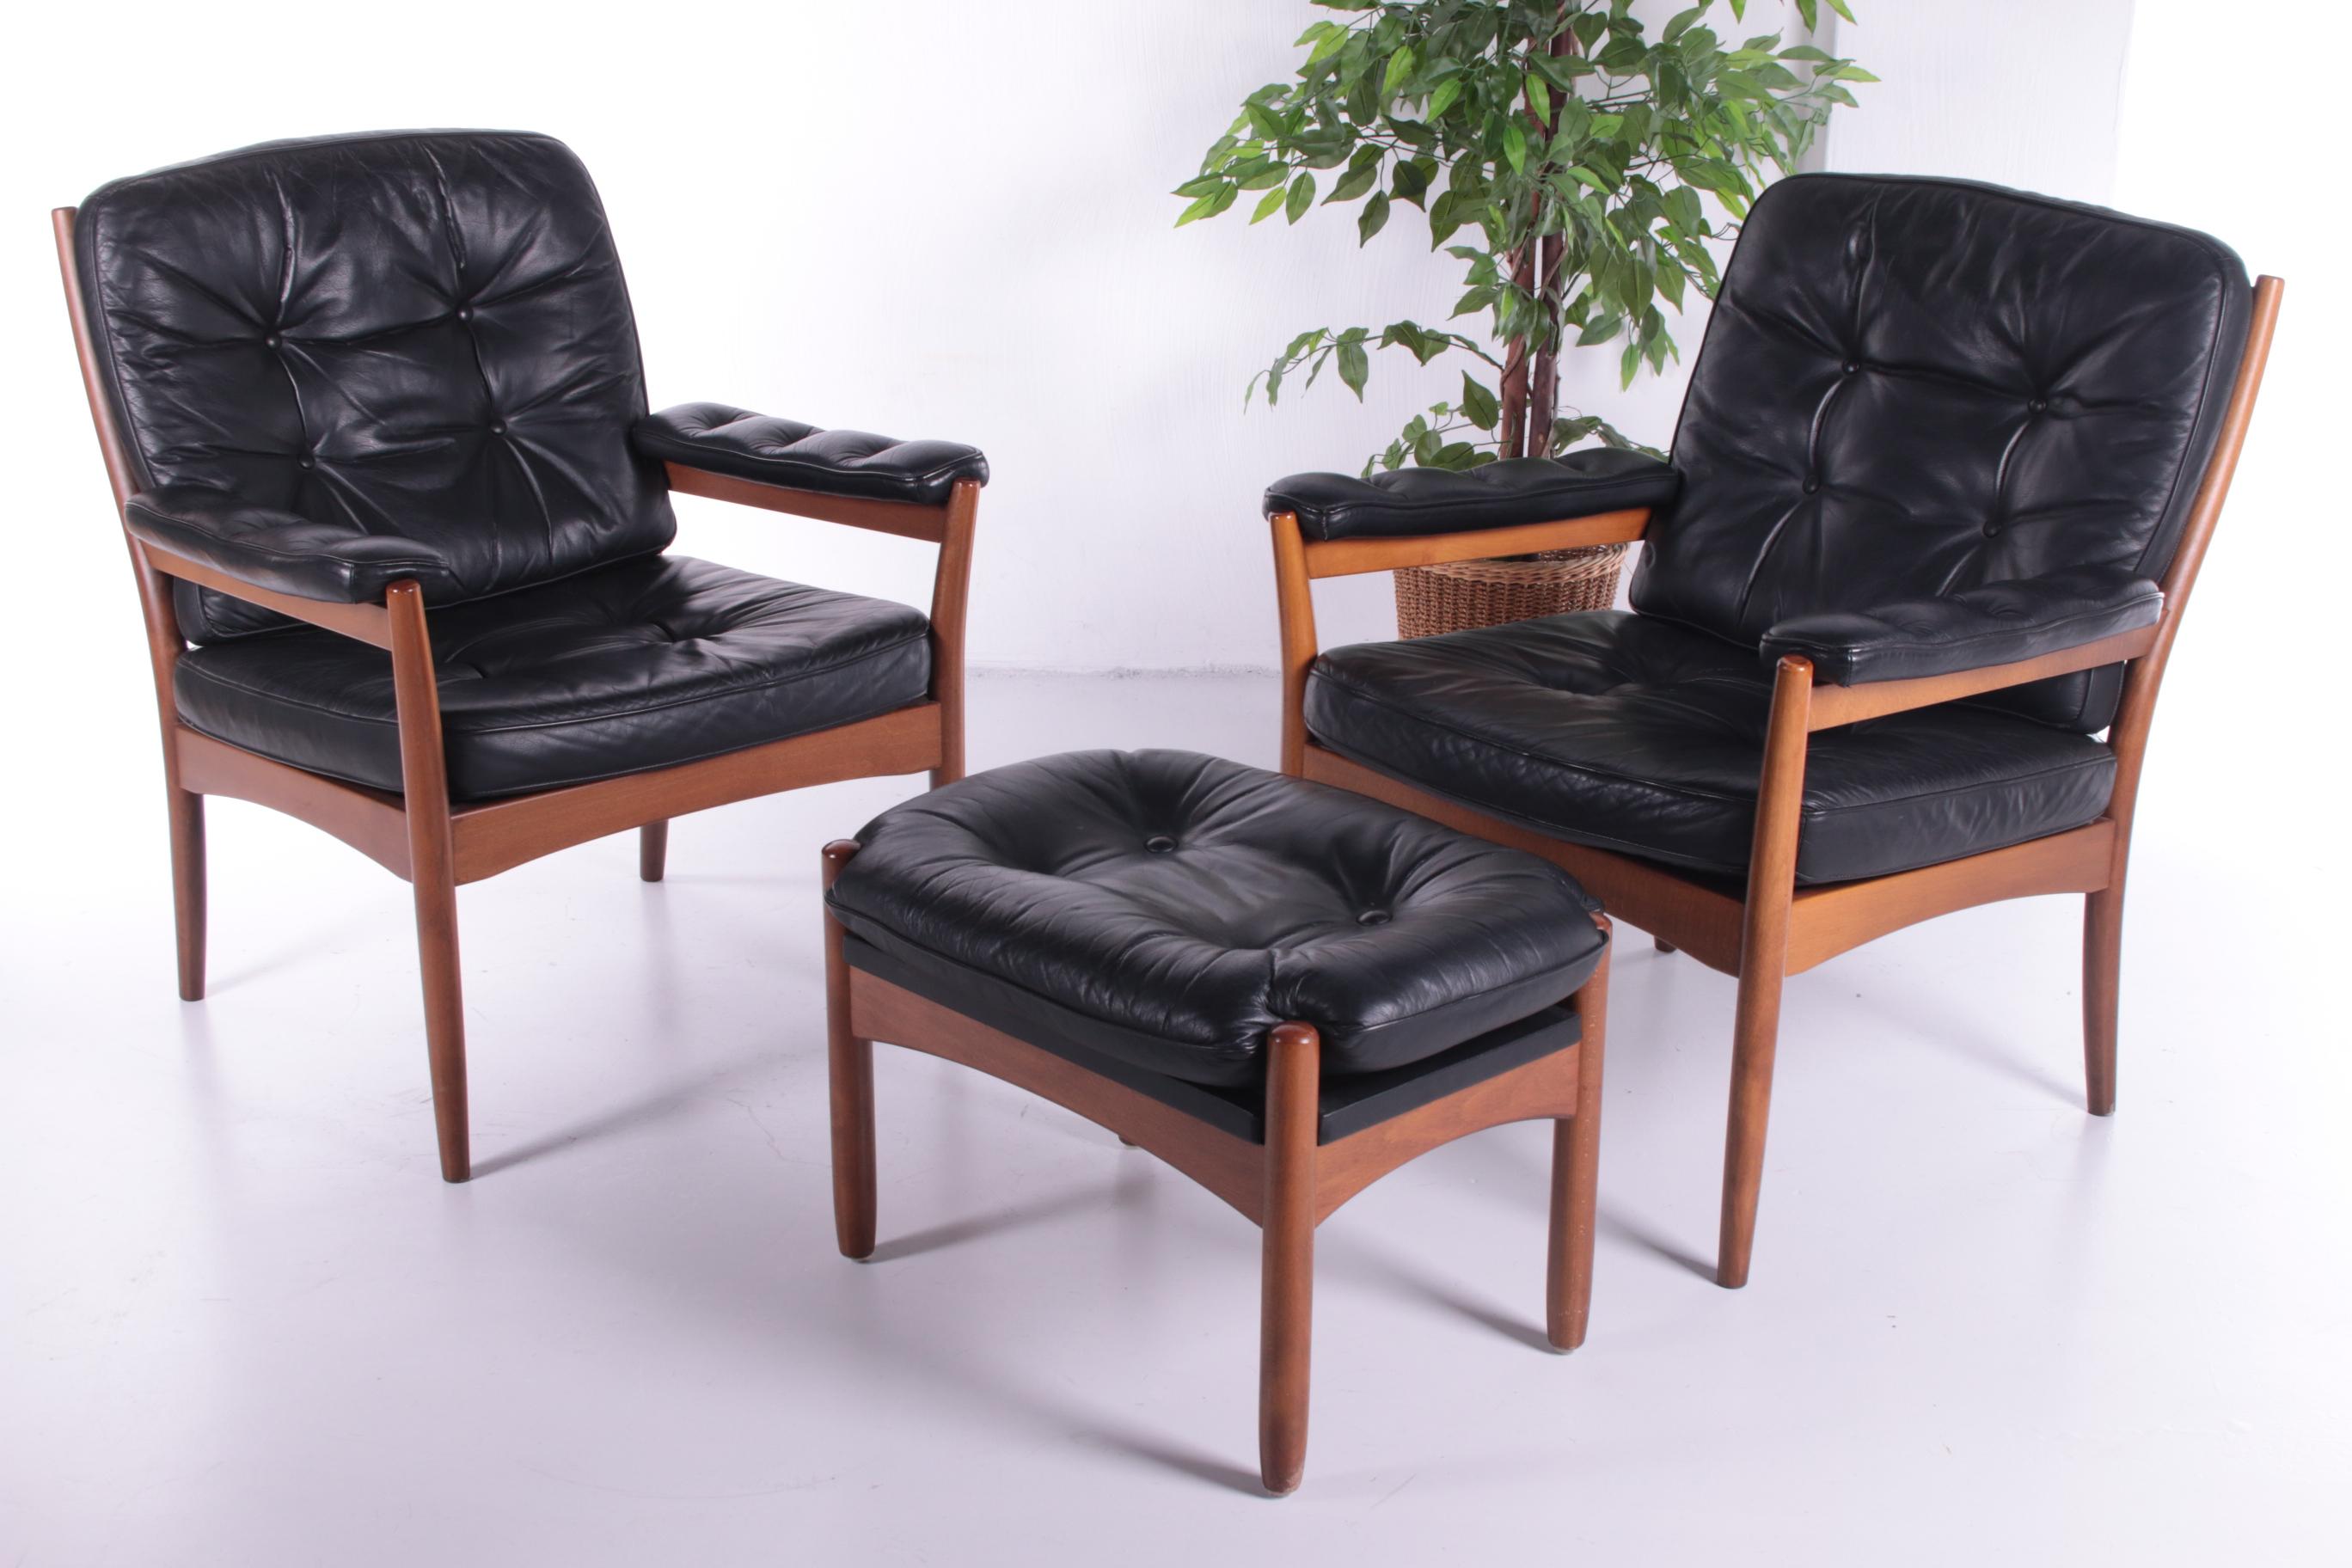 Vintage set of 2 lounge chairs by Gote Mobler Nassjo, Sweden, 1970s.


Beautiful set of 2 lounge chairs with ottoman. Made of wood with leather upholstery.

These chairs are still in top condition, beautifully finished with buttons that are all